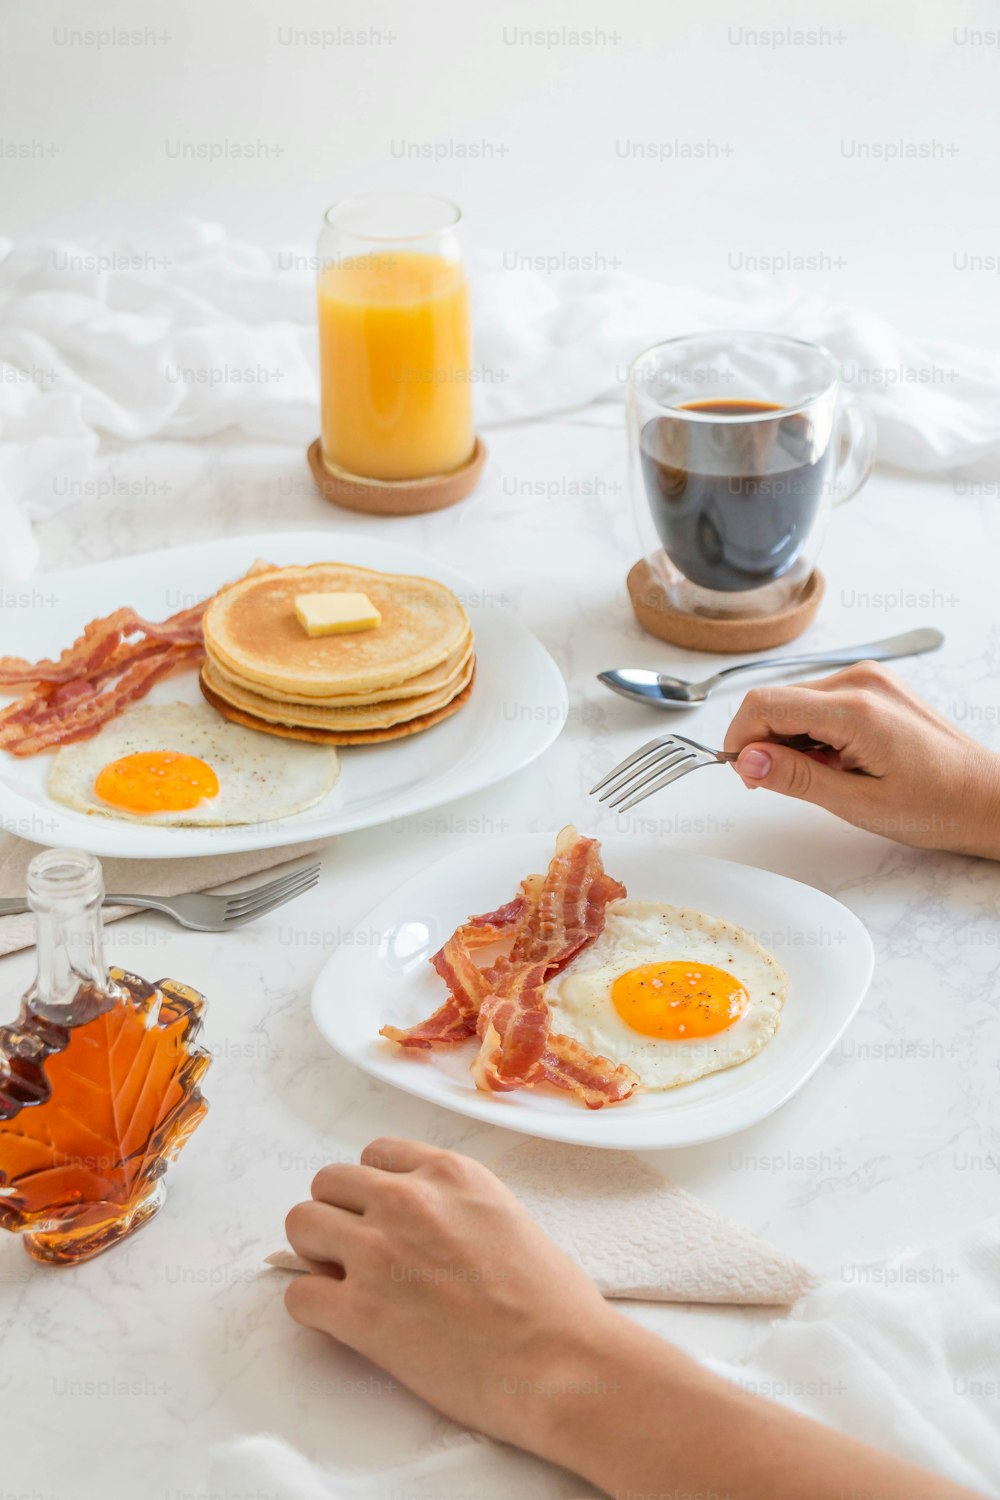 a person sitting at a table with breakfast food